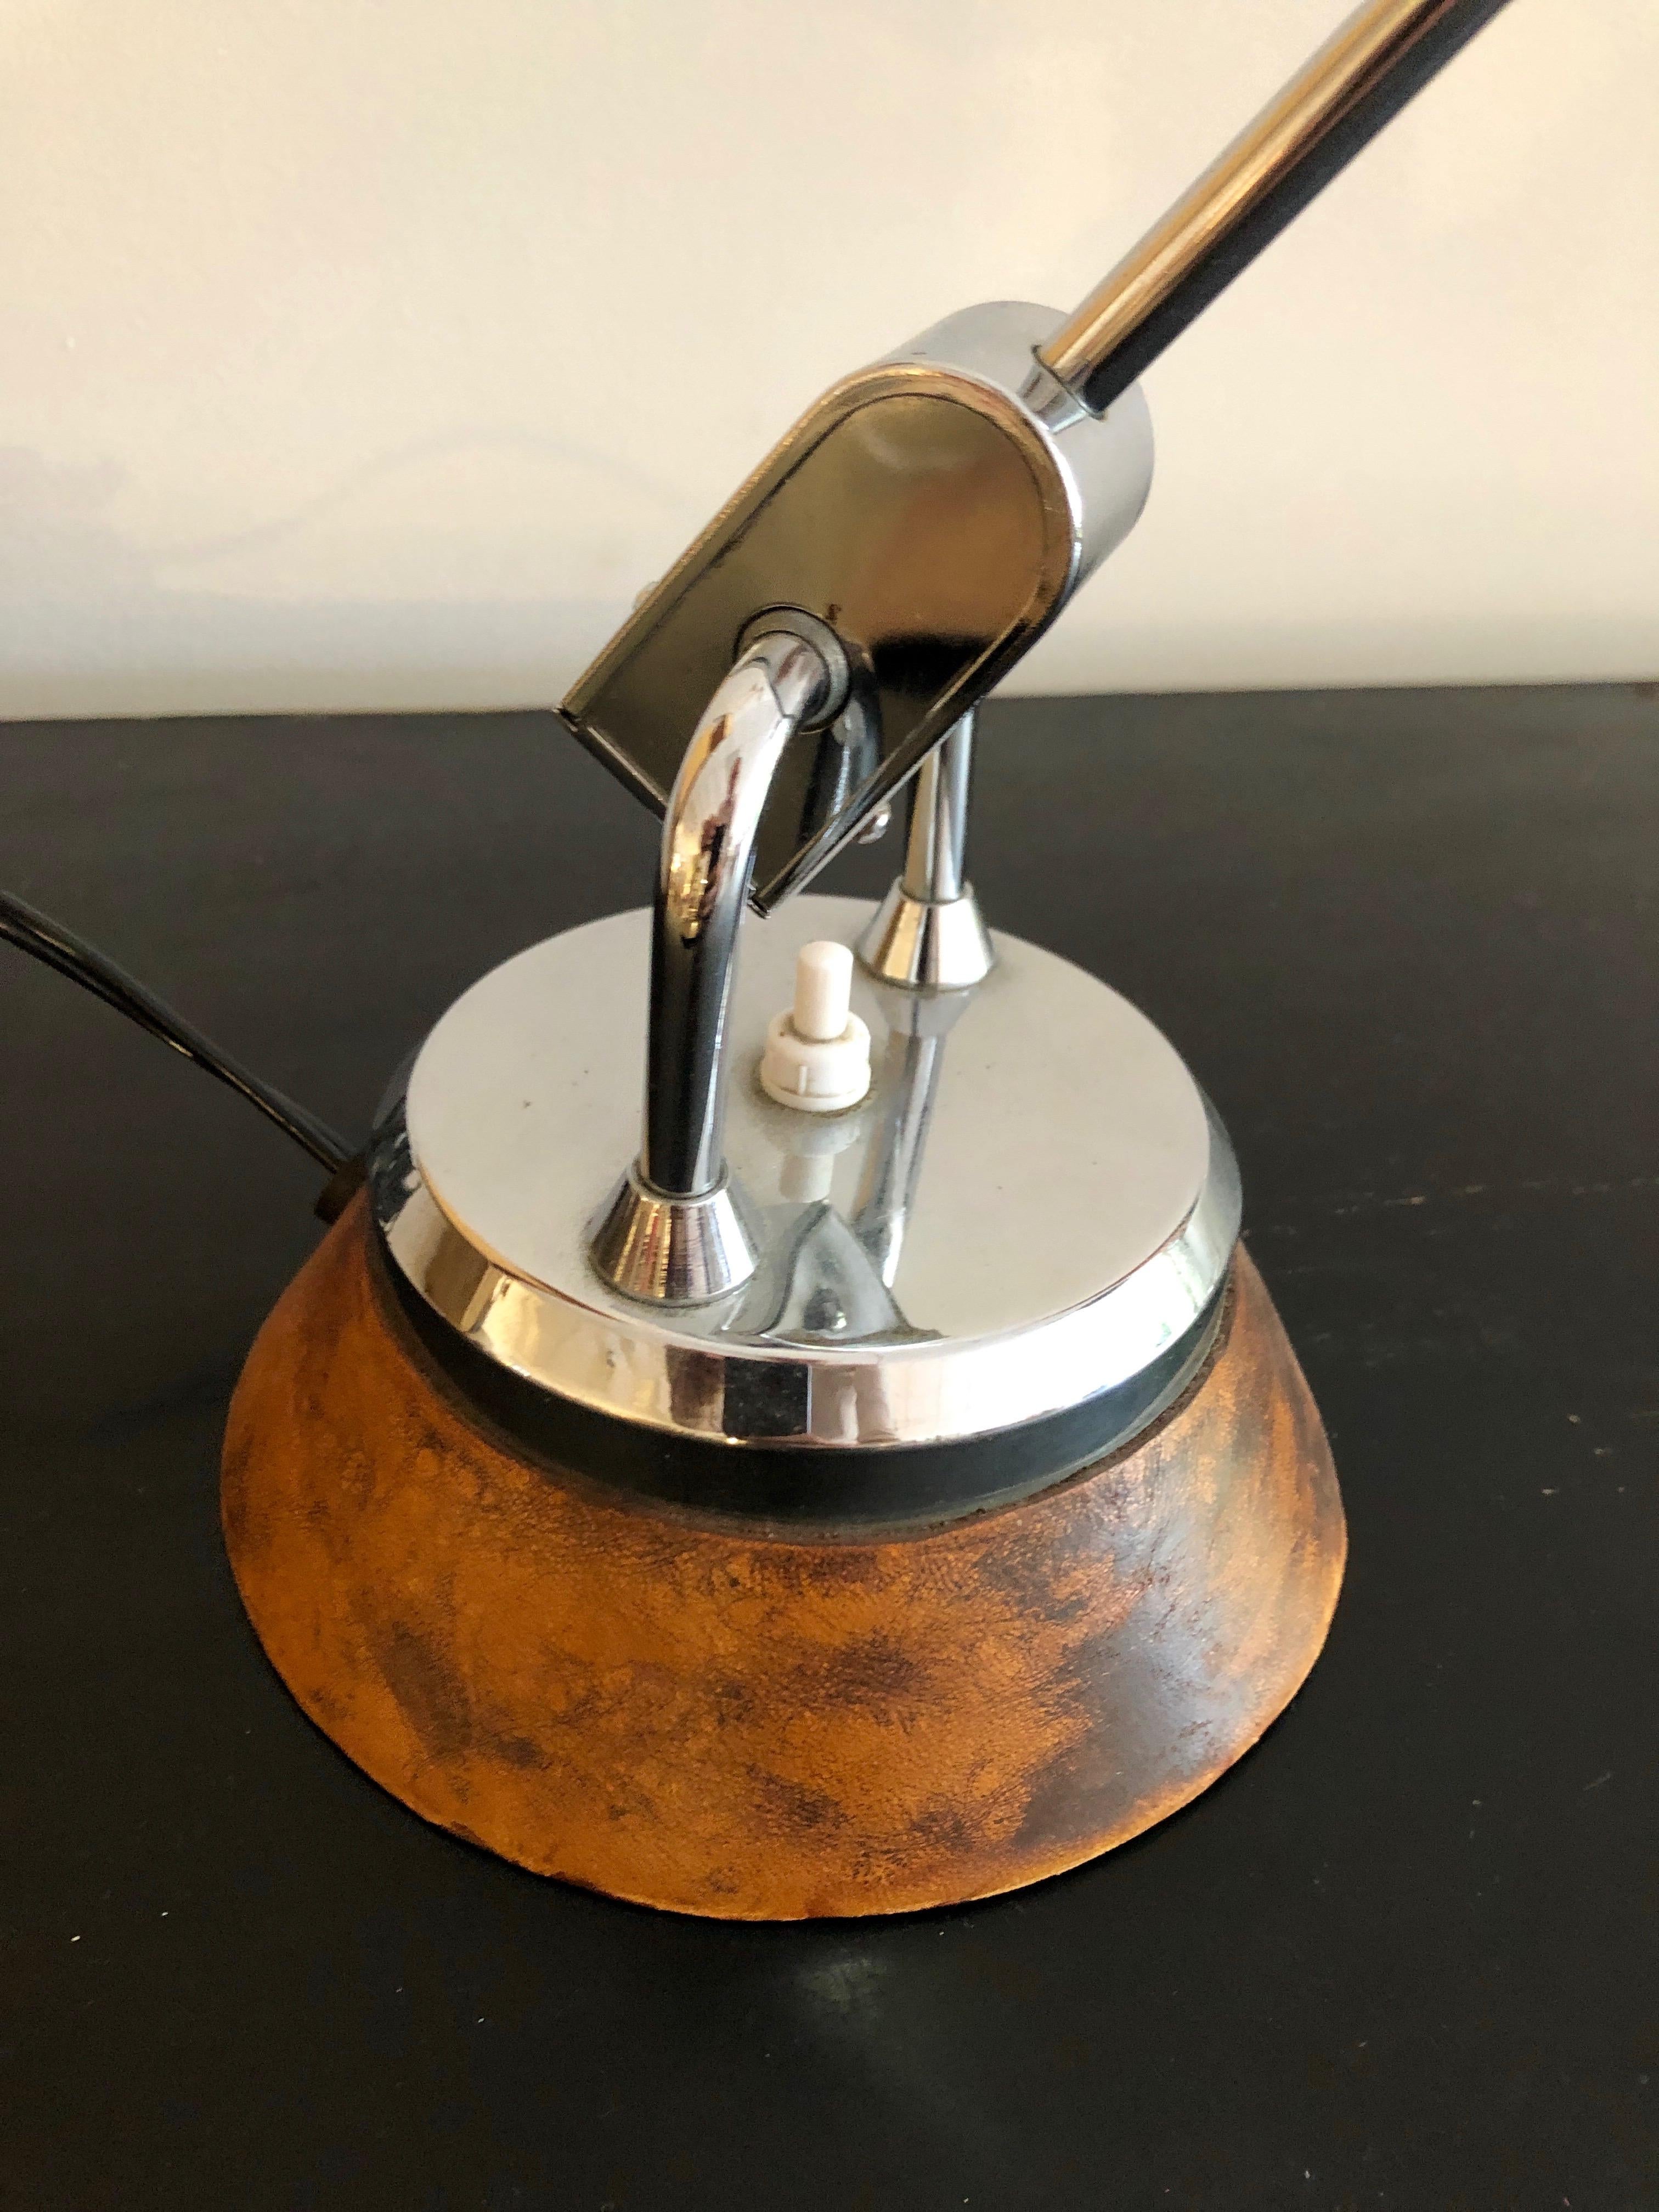 Elegant design for Jumo lighting from the late 1930s with the extra-rare leather wrapped base. Beautiful counter-balance movement.